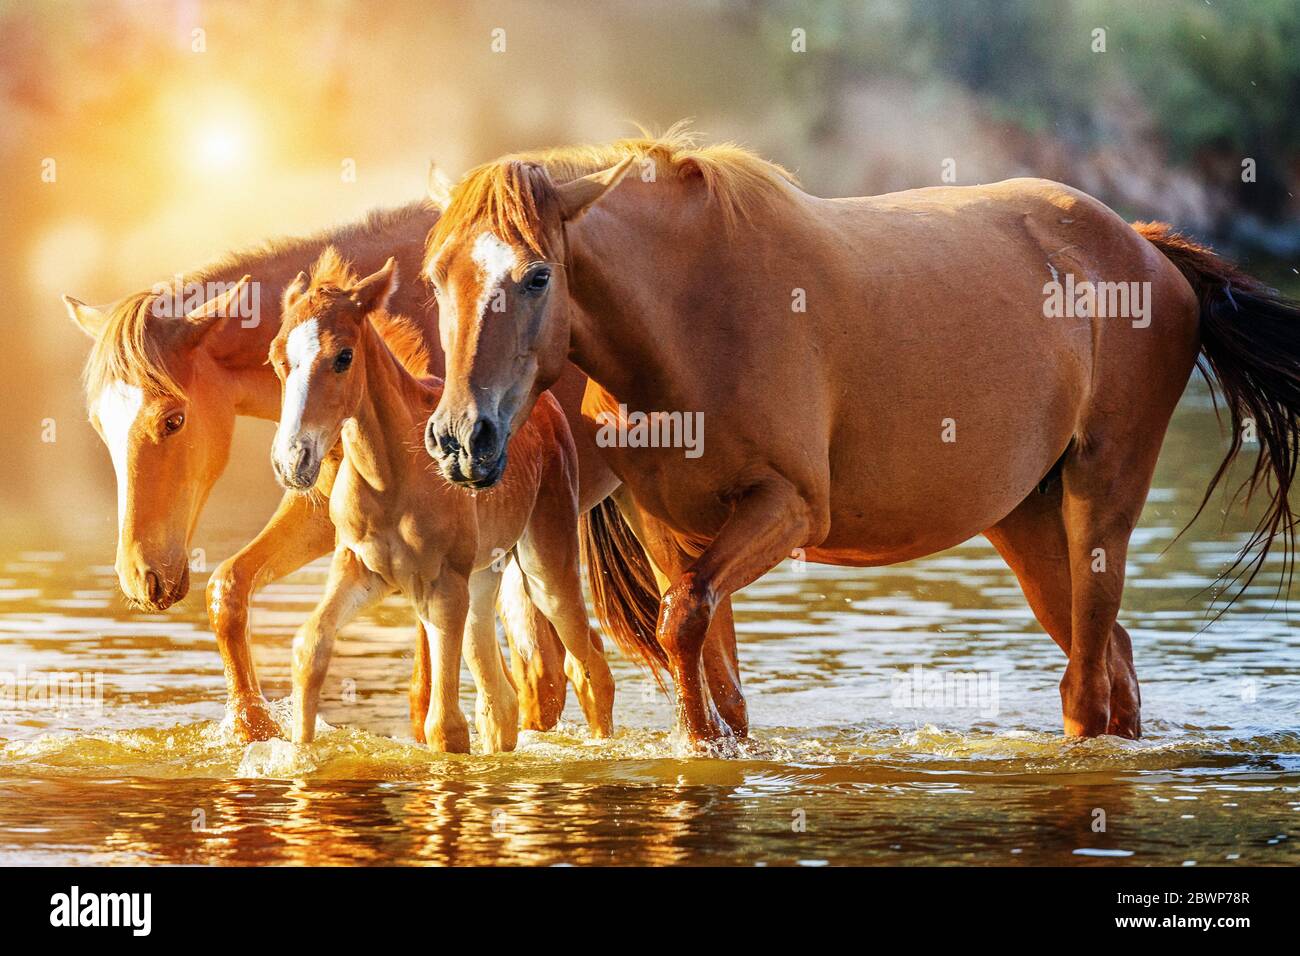 Baby foal and two adult horses walking in the Salt River in Mesa, Arizona with golden morning sunlight Stock Photo